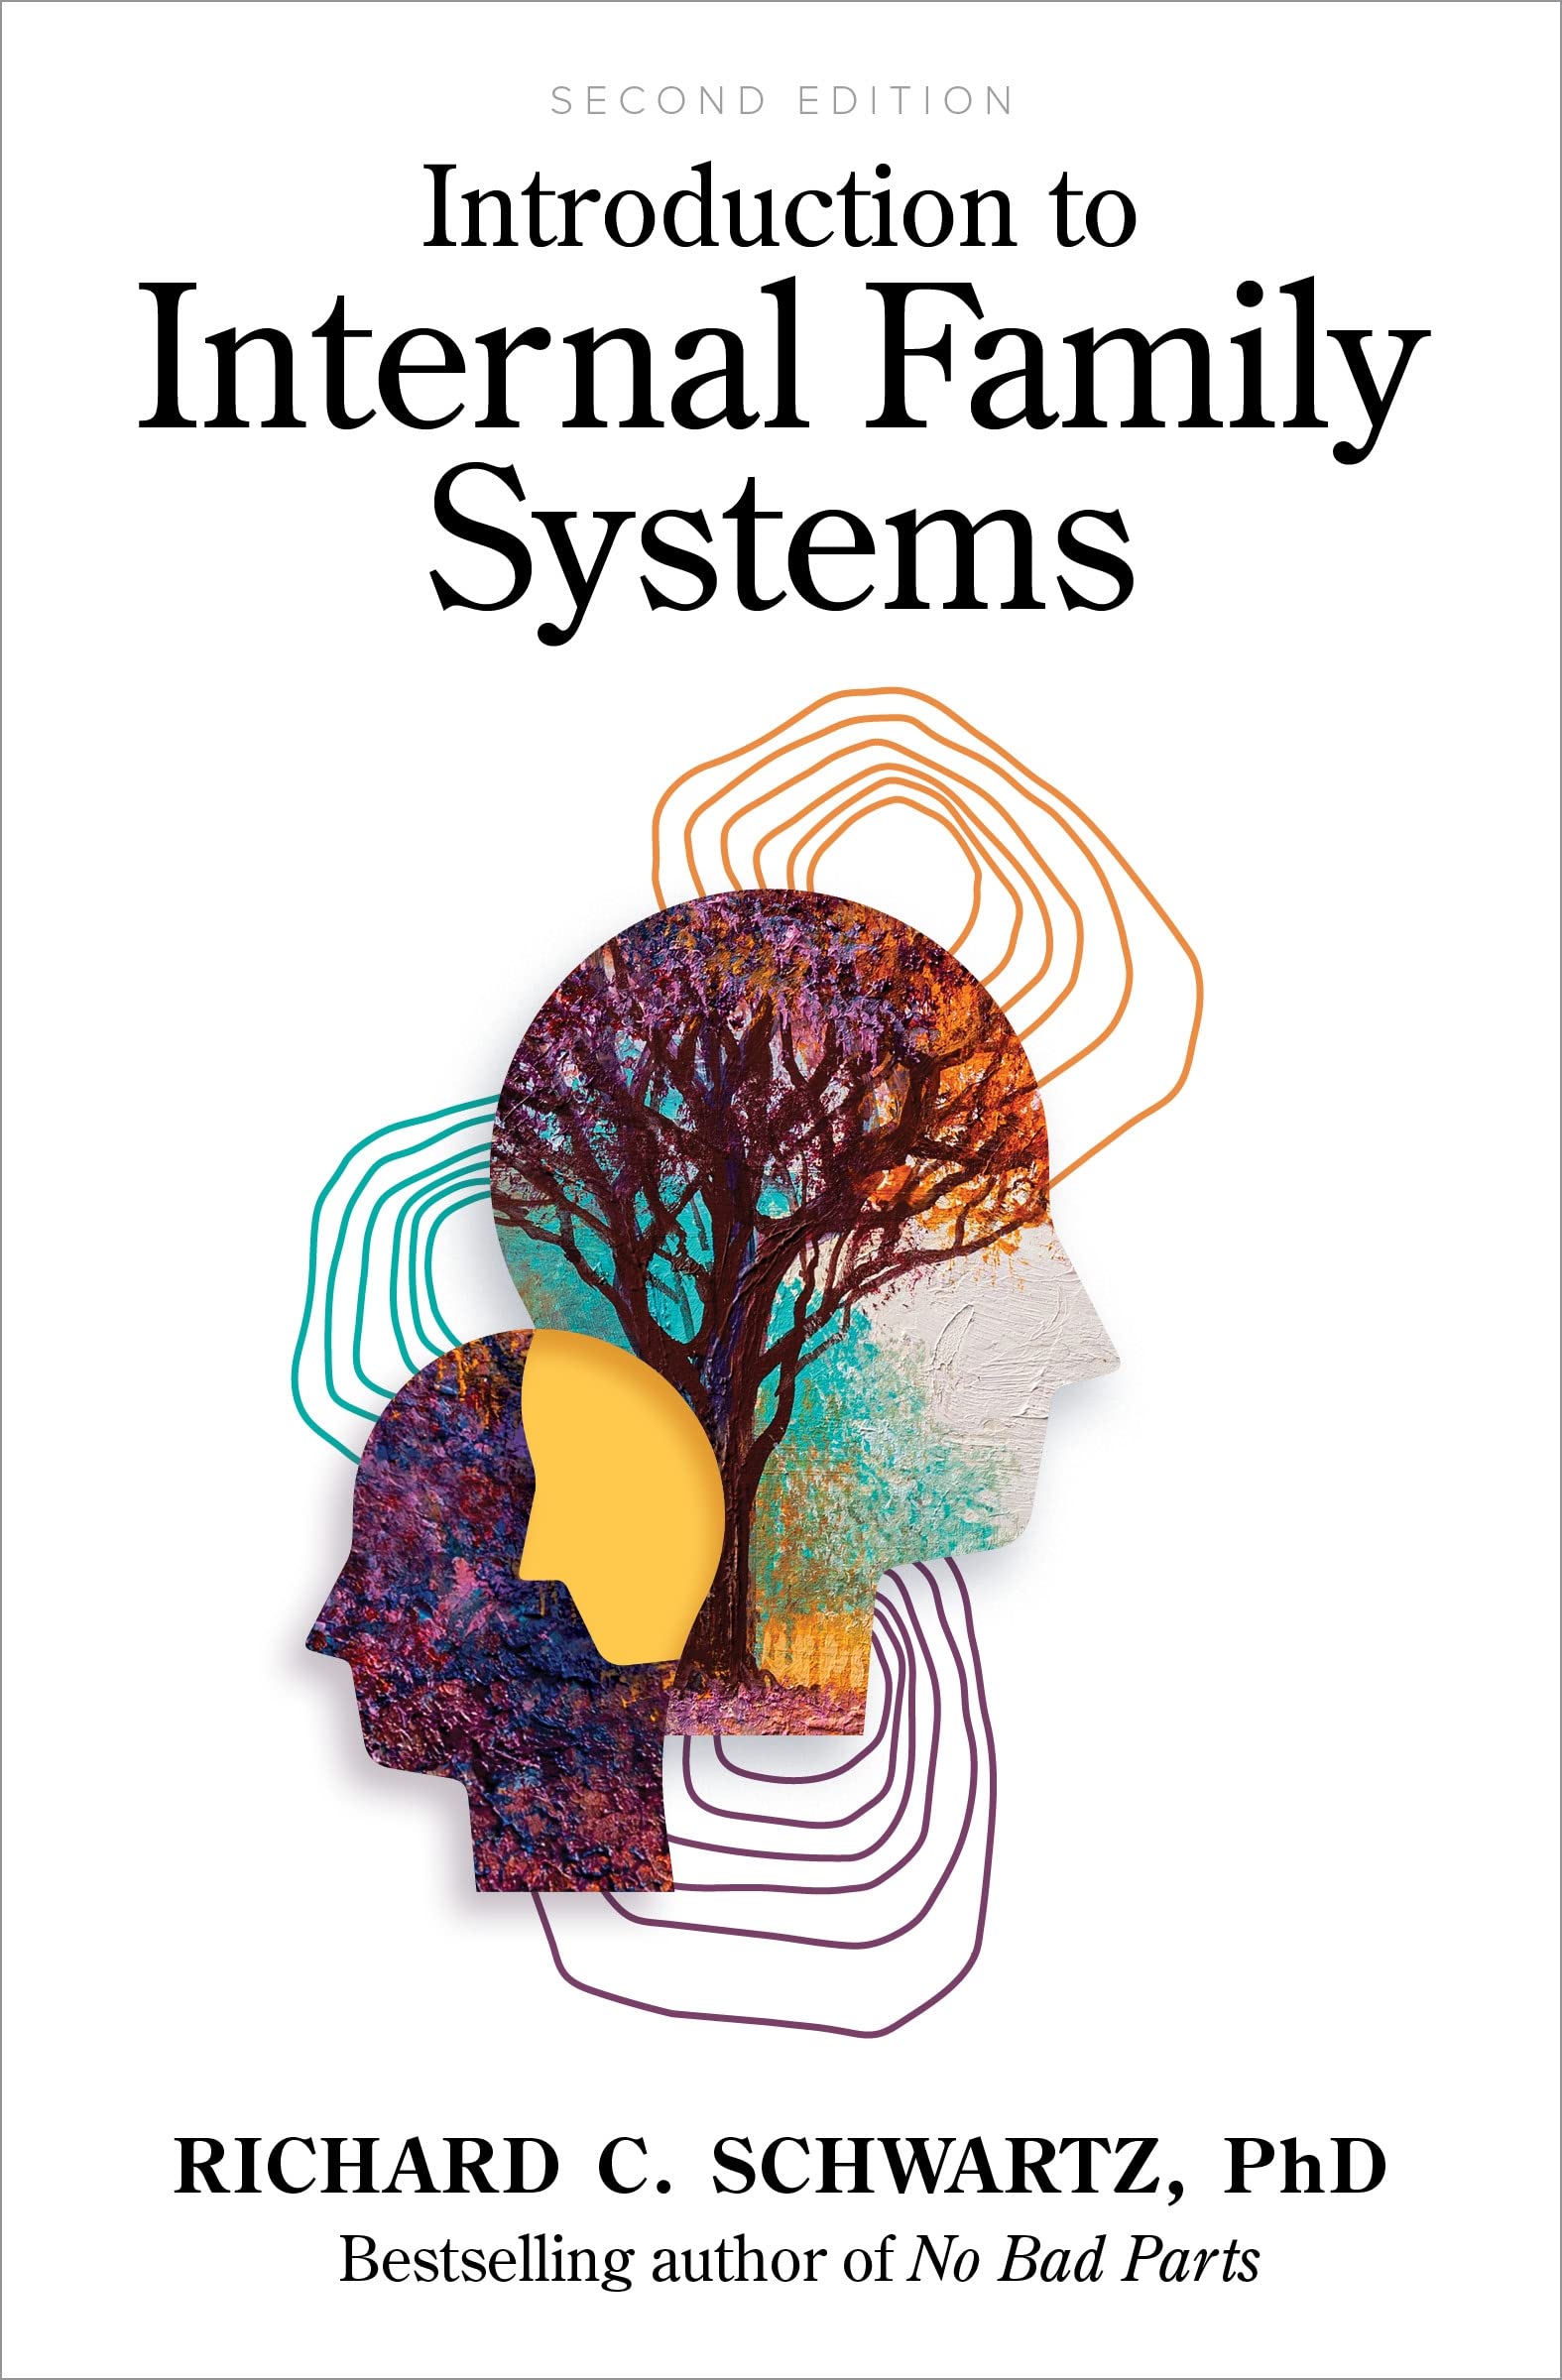 Introduction to Internal Family Systems by: Richard C. Schwartz